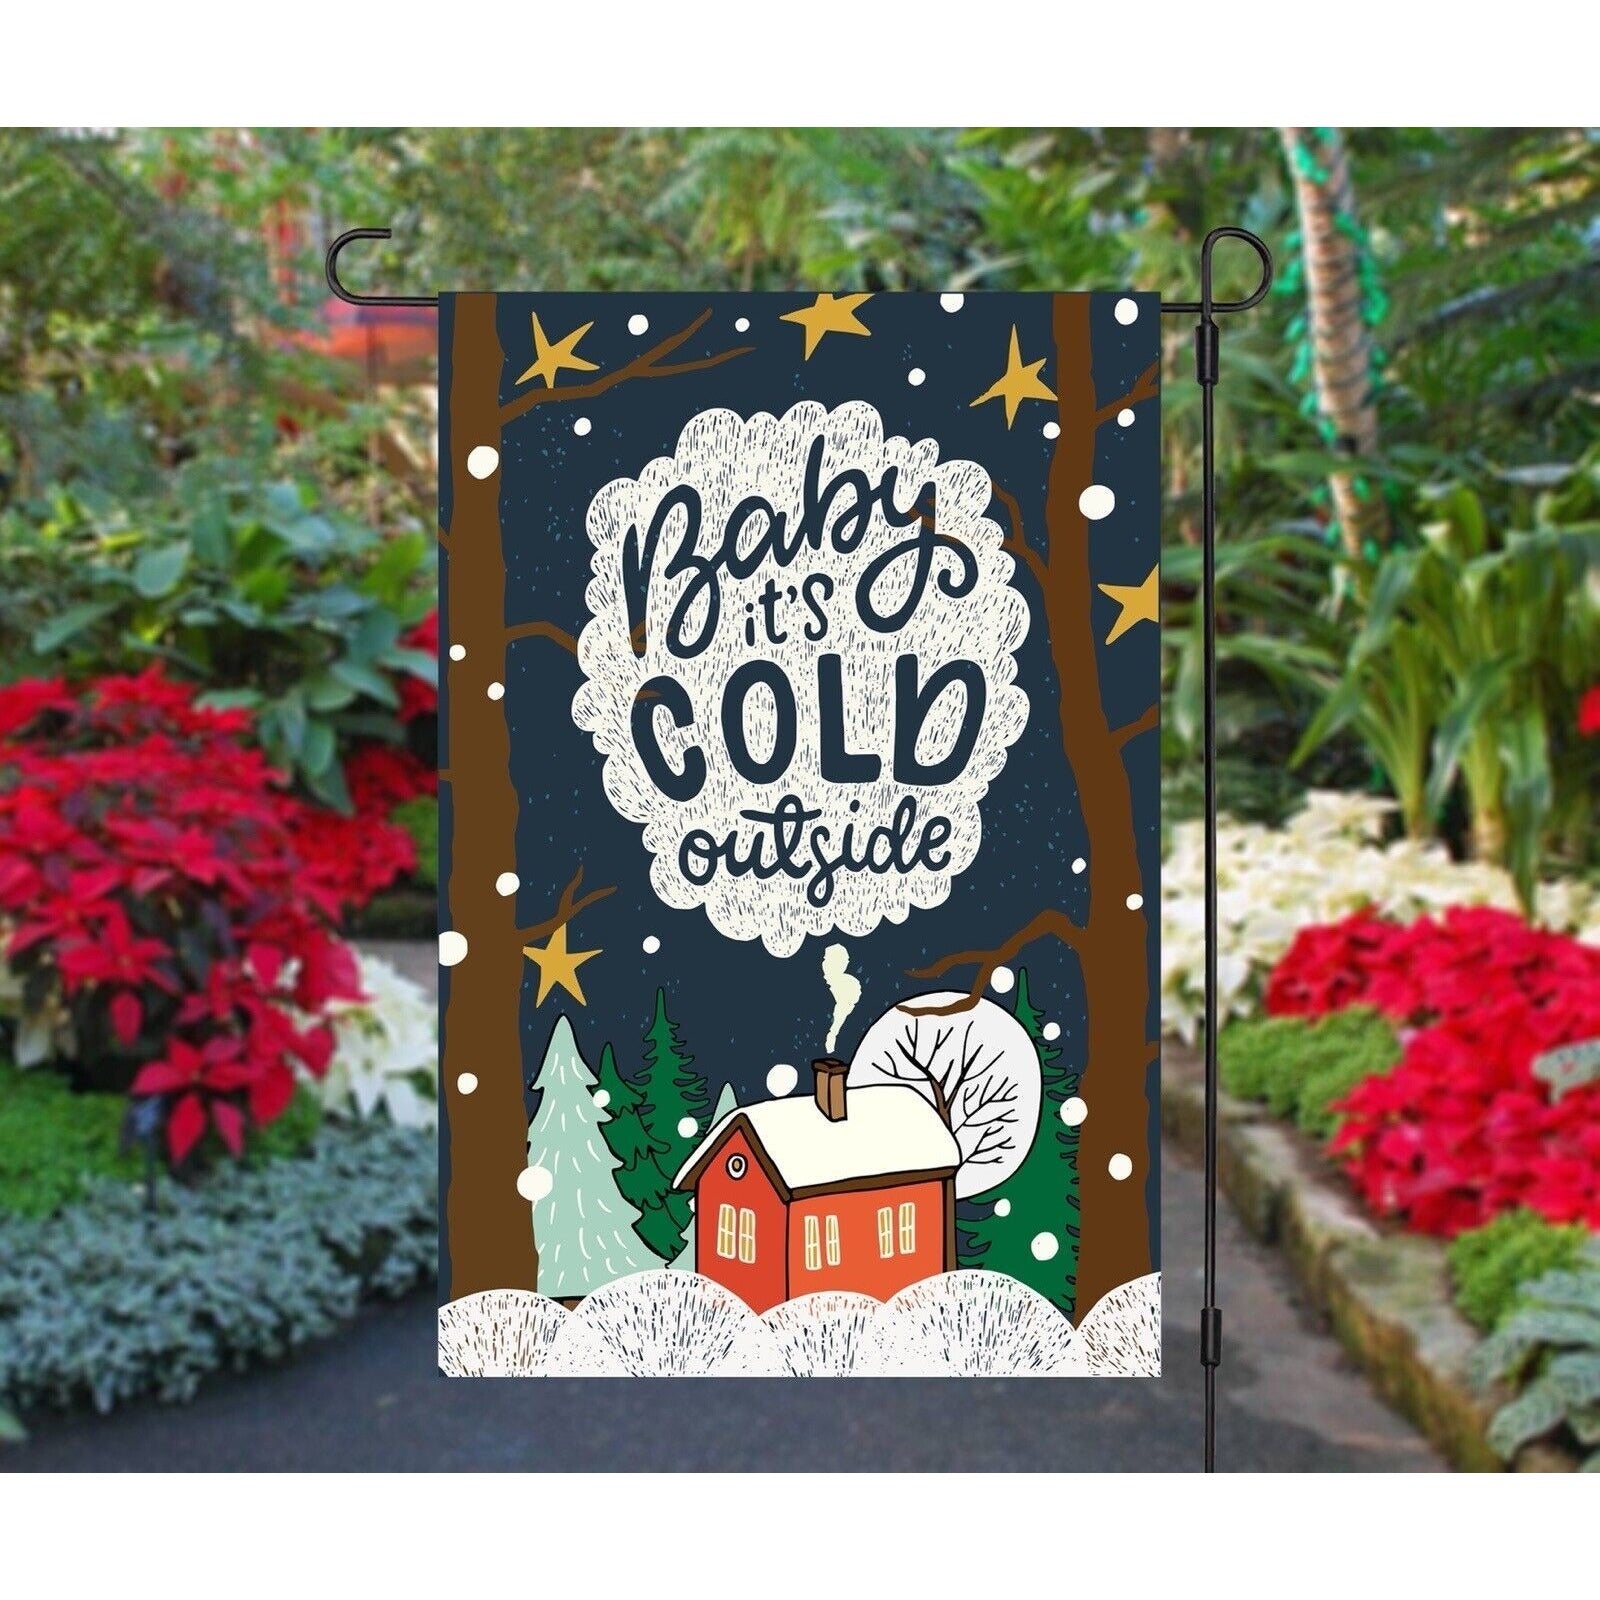 BABY ITS COLD OUTSIDE Double 2 Sided Winter Garden Flag Yard Decoration NEW